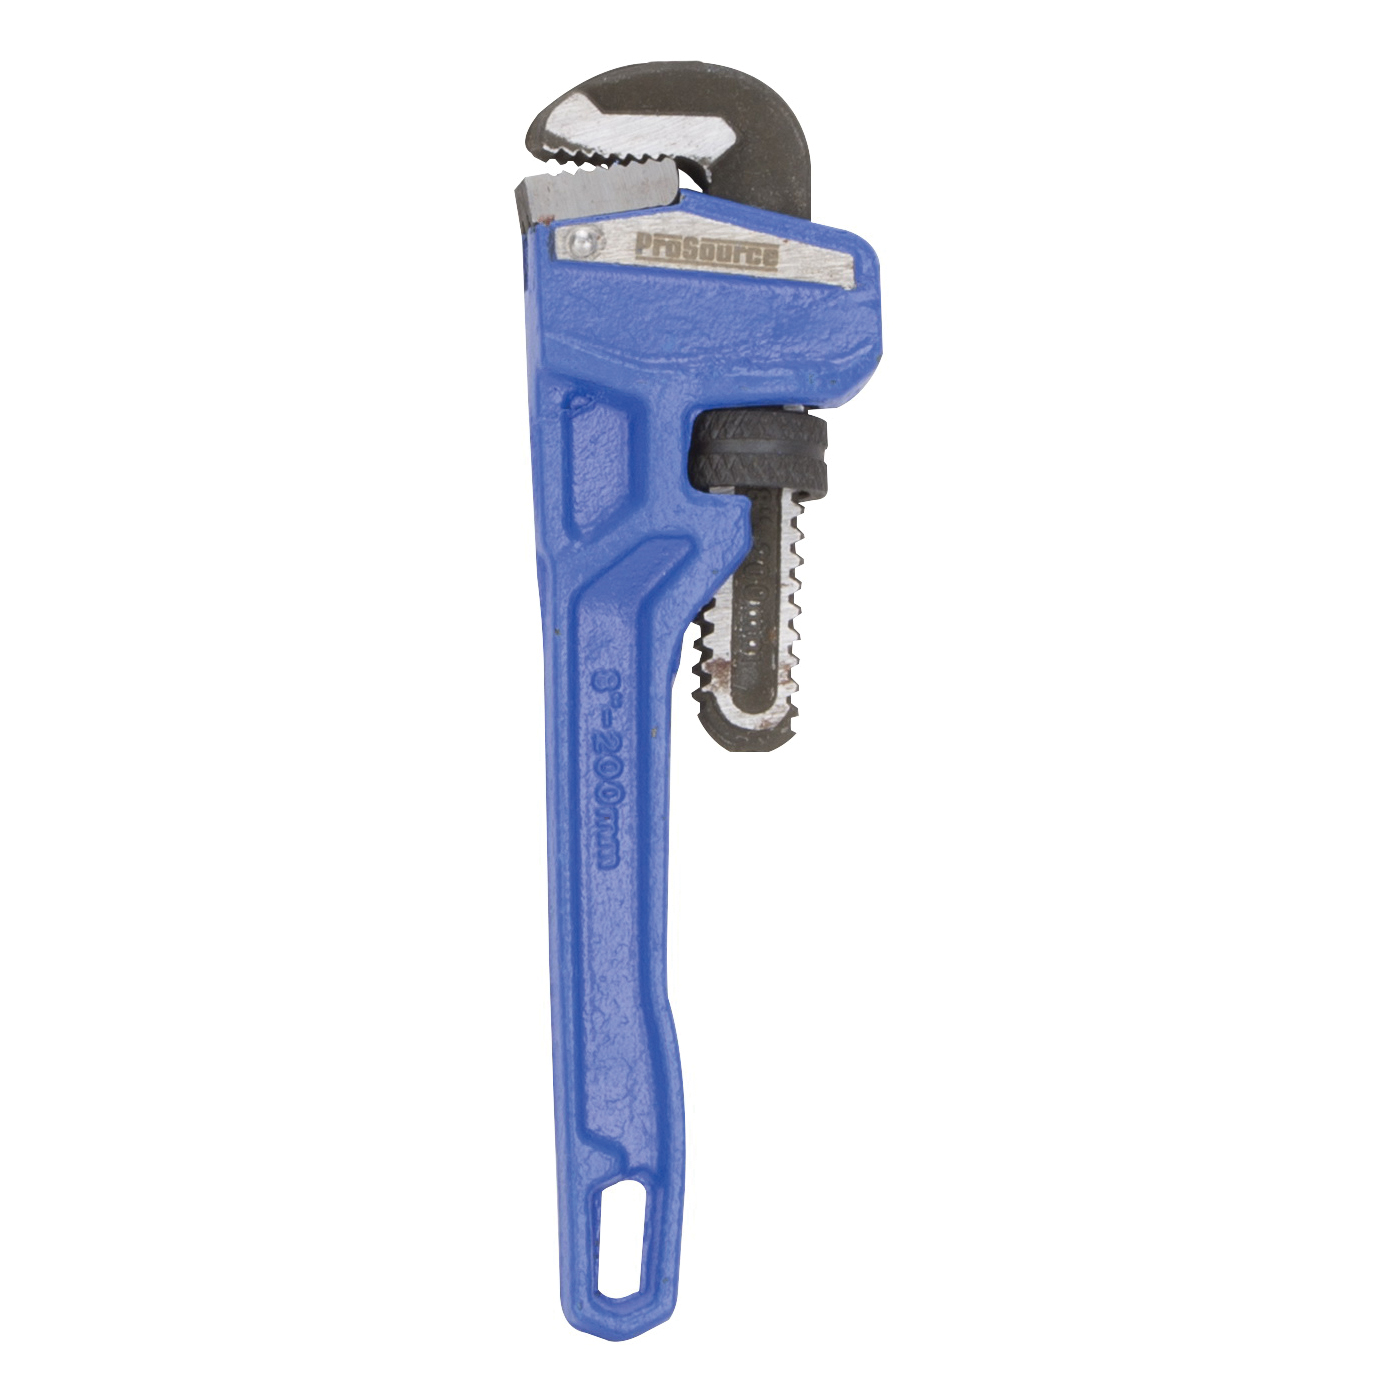 JL40108 Pipe Wrench, 19 mm Jaw, 8 in L, Serrated Jaw, Die-Cast Carbon Steel, Powder-Coated, Heavy-Duty Handle